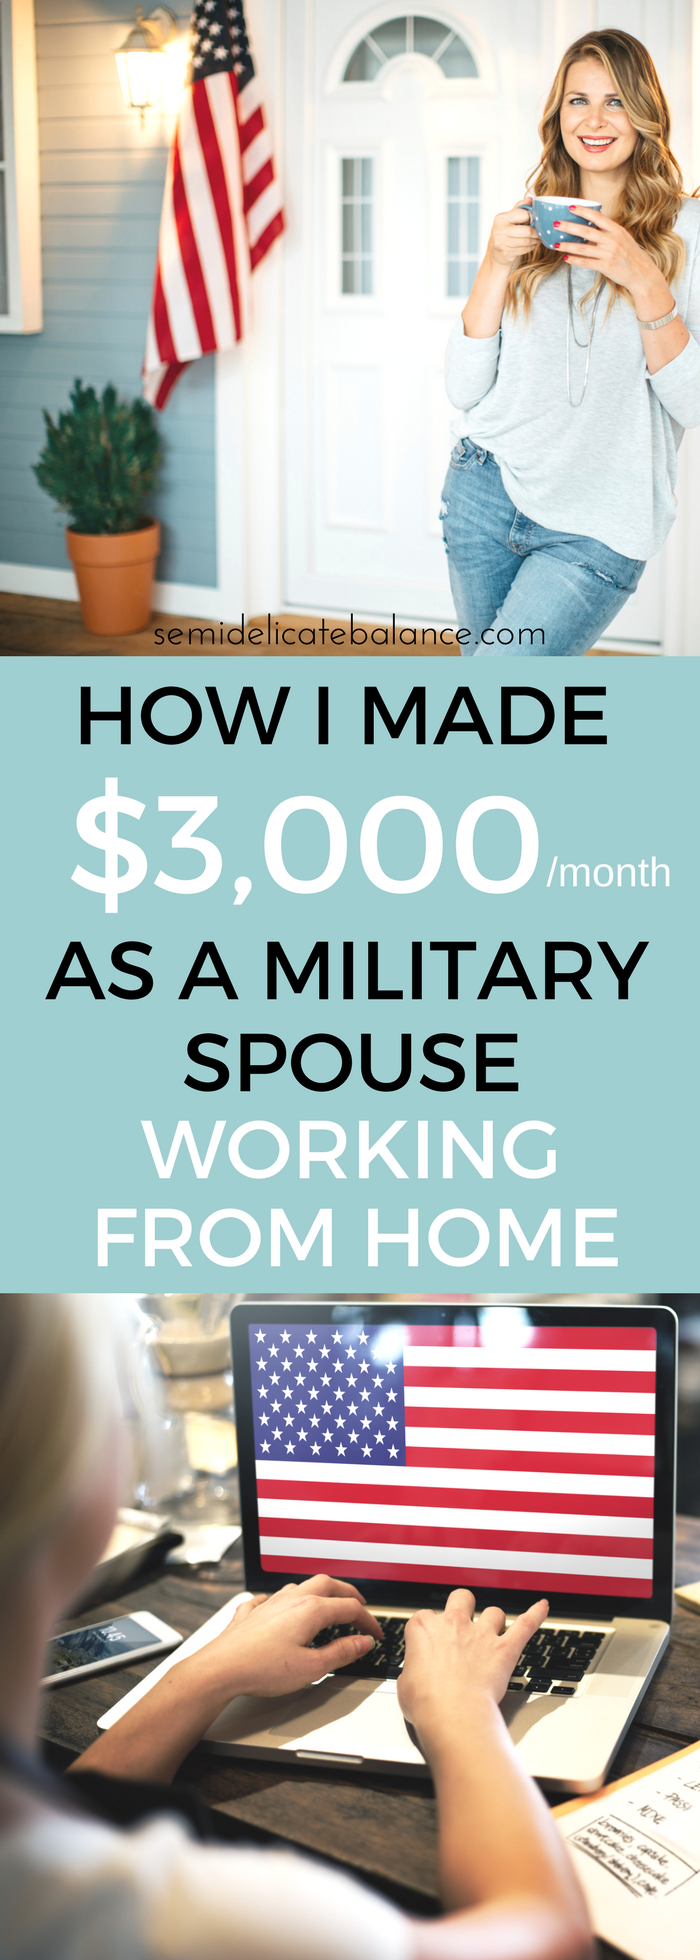 How I Made $3000 As A Military Spouse Working From Home, Legit ways to make money as a stay at home military wife